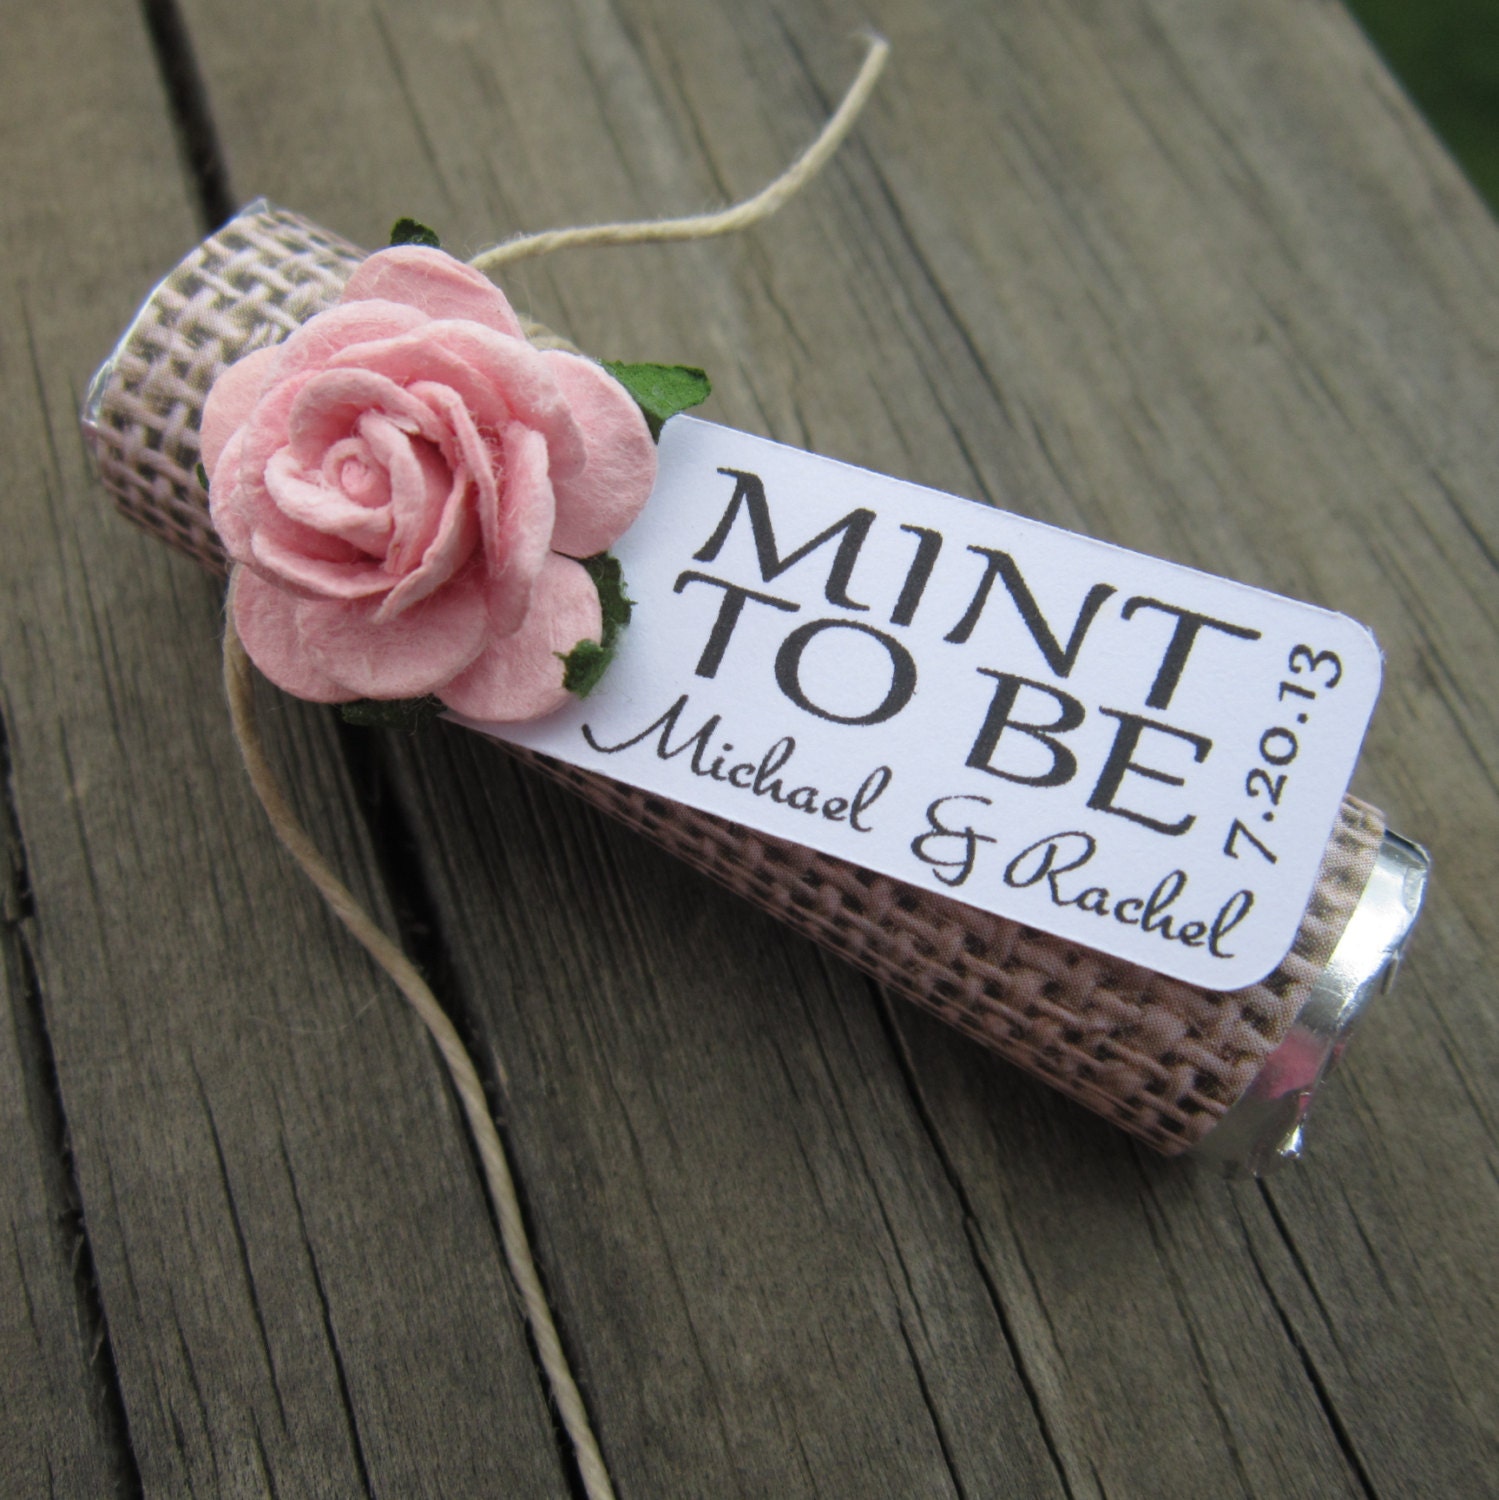 Bridal shower wedding favor - "Mint to be" favors with personalized tag